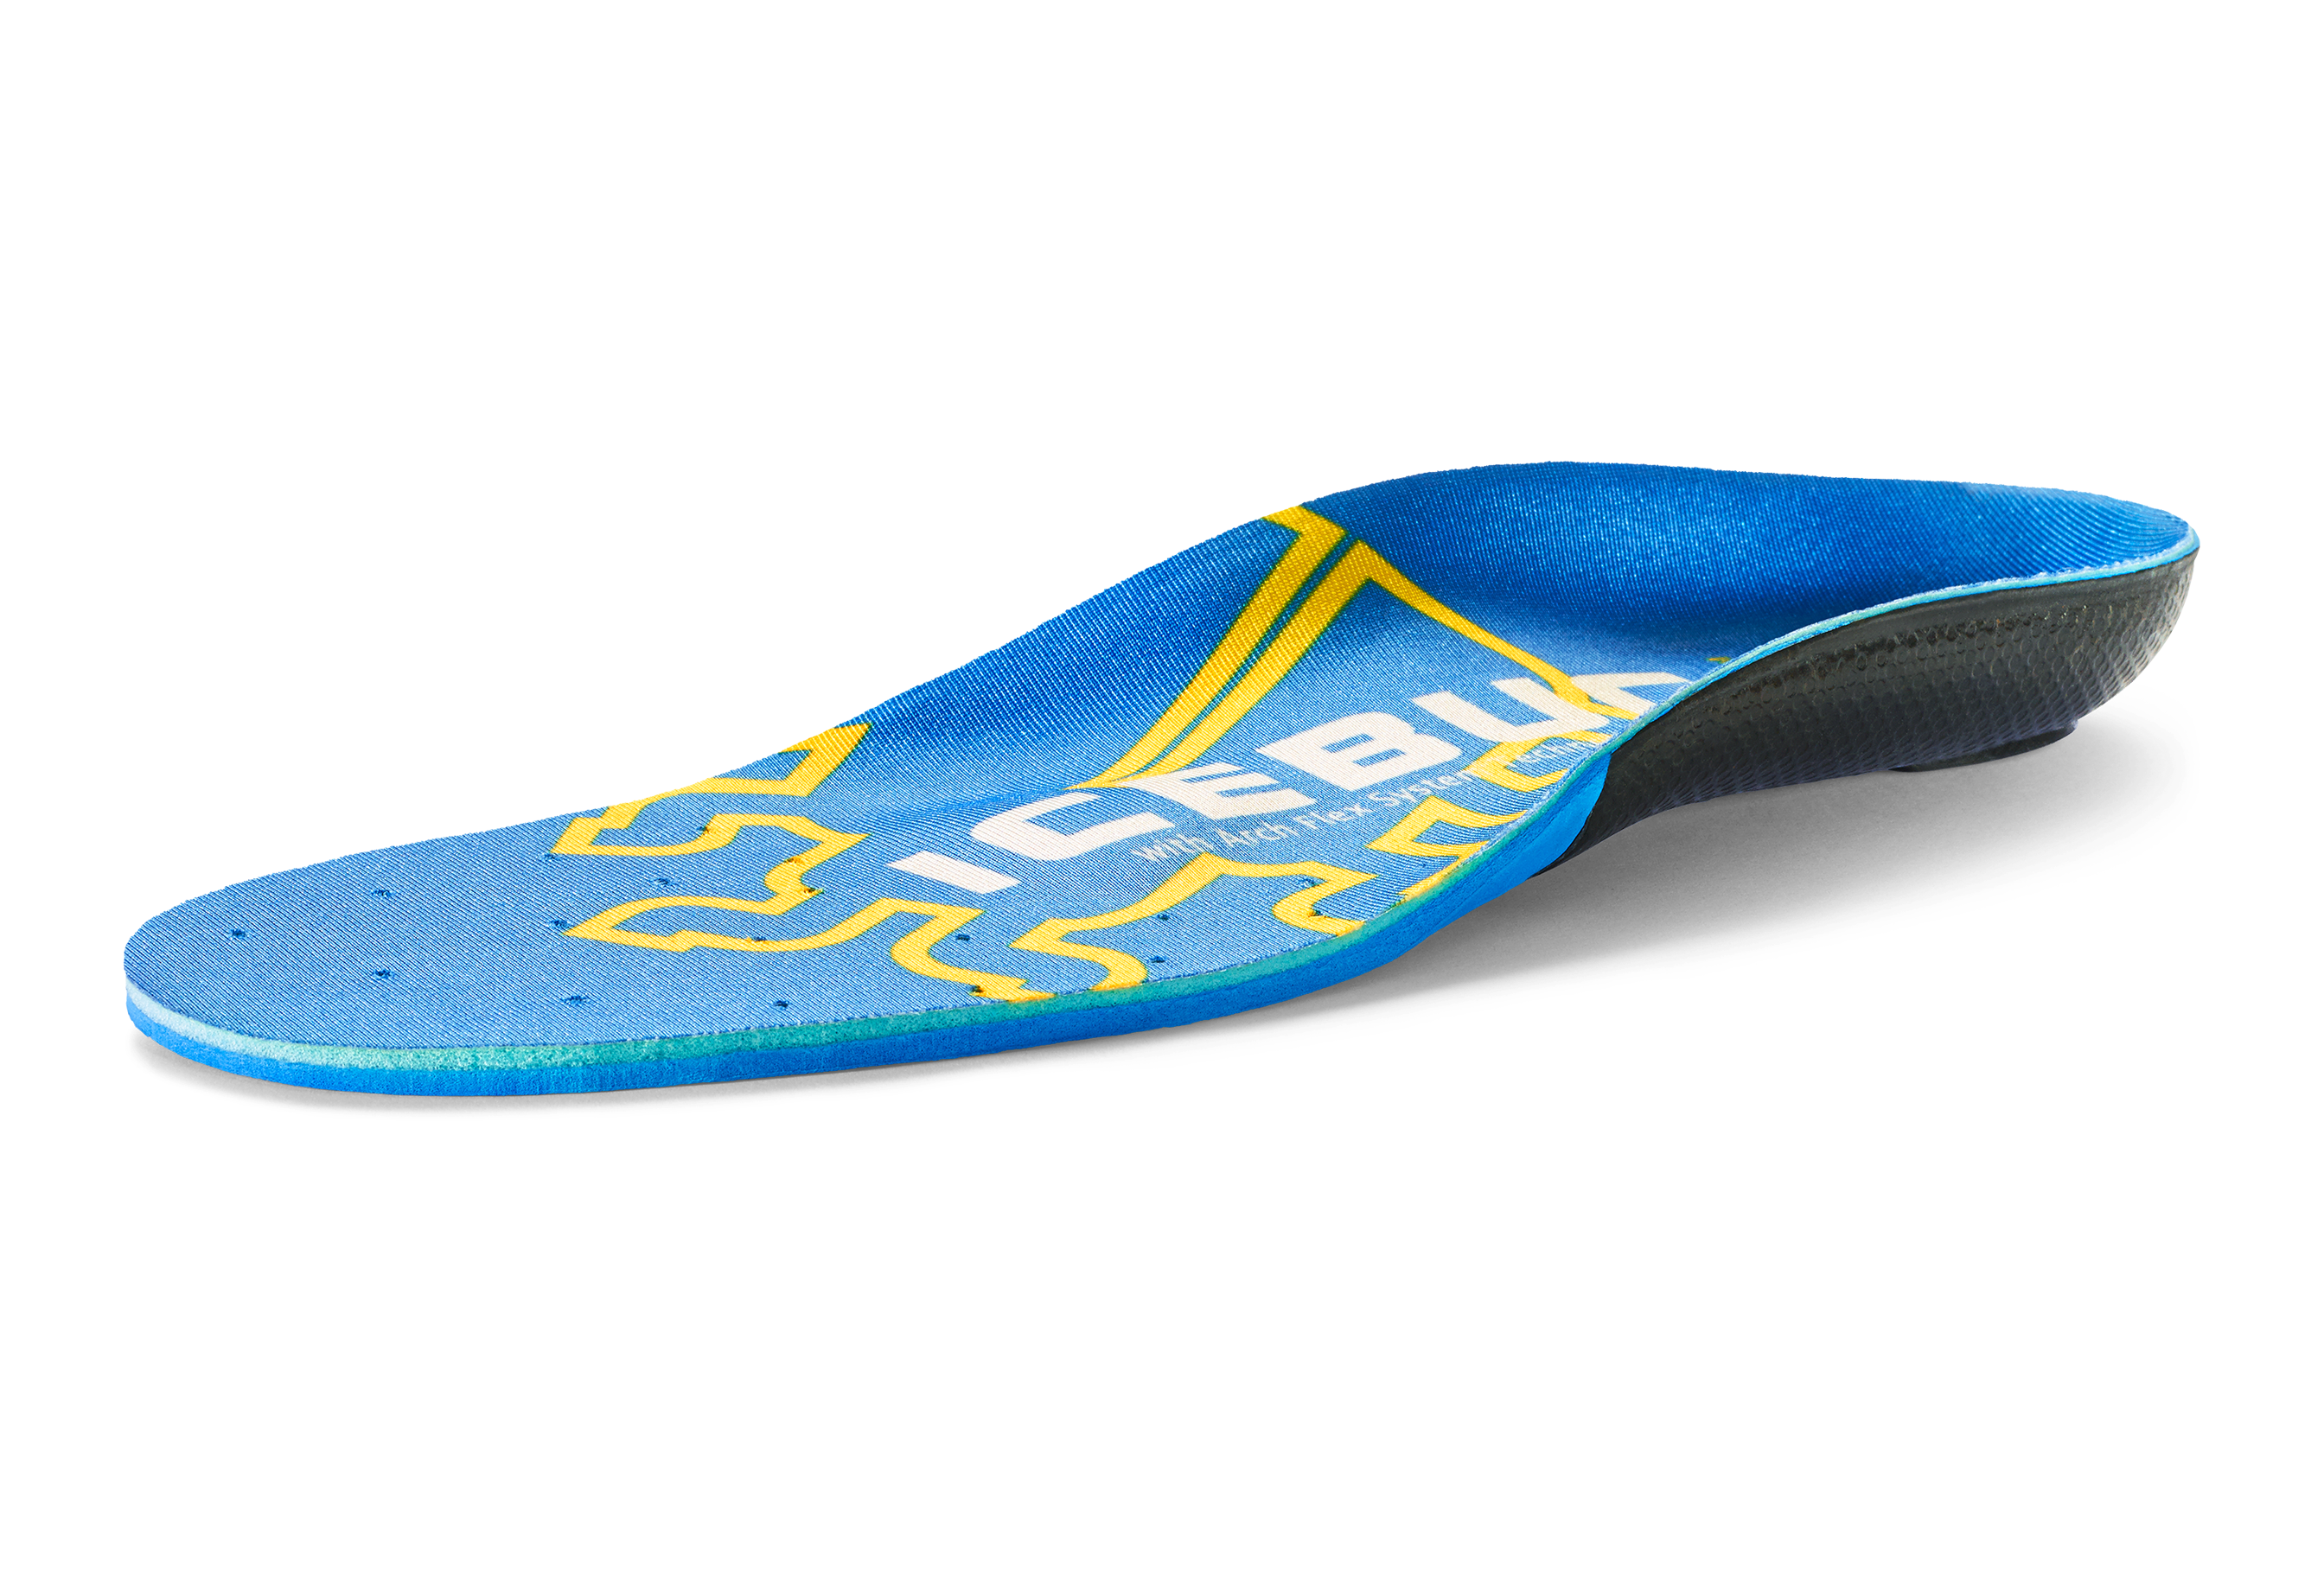 Icebug Low Volume Insoles with Arch Flex Technology